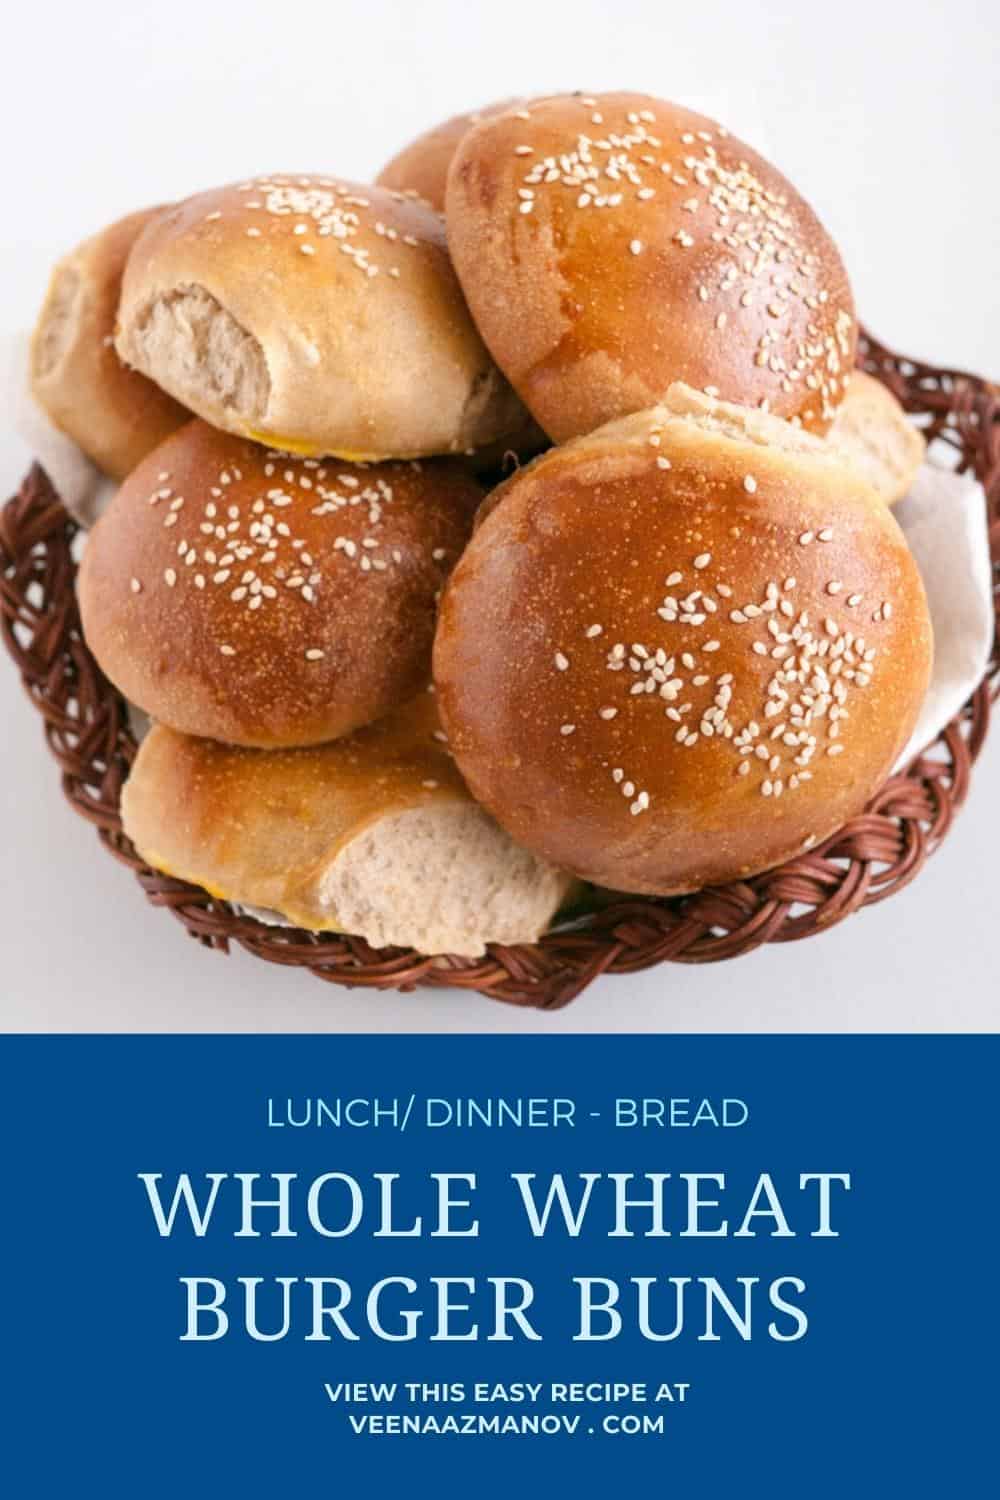 Pinterest image for burger buns with whole wheat.